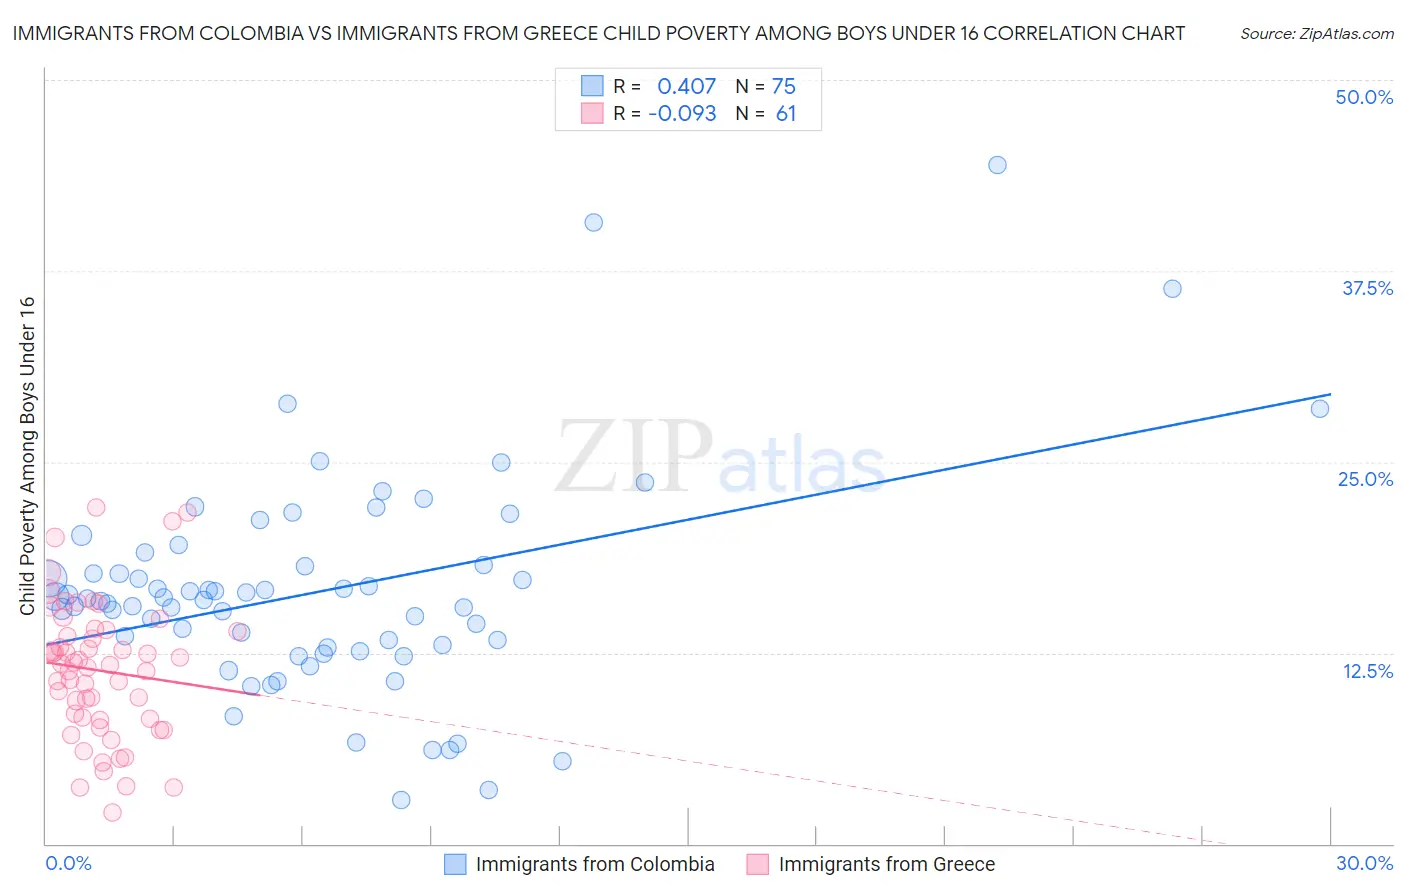 Immigrants from Colombia vs Immigrants from Greece Child Poverty Among Boys Under 16